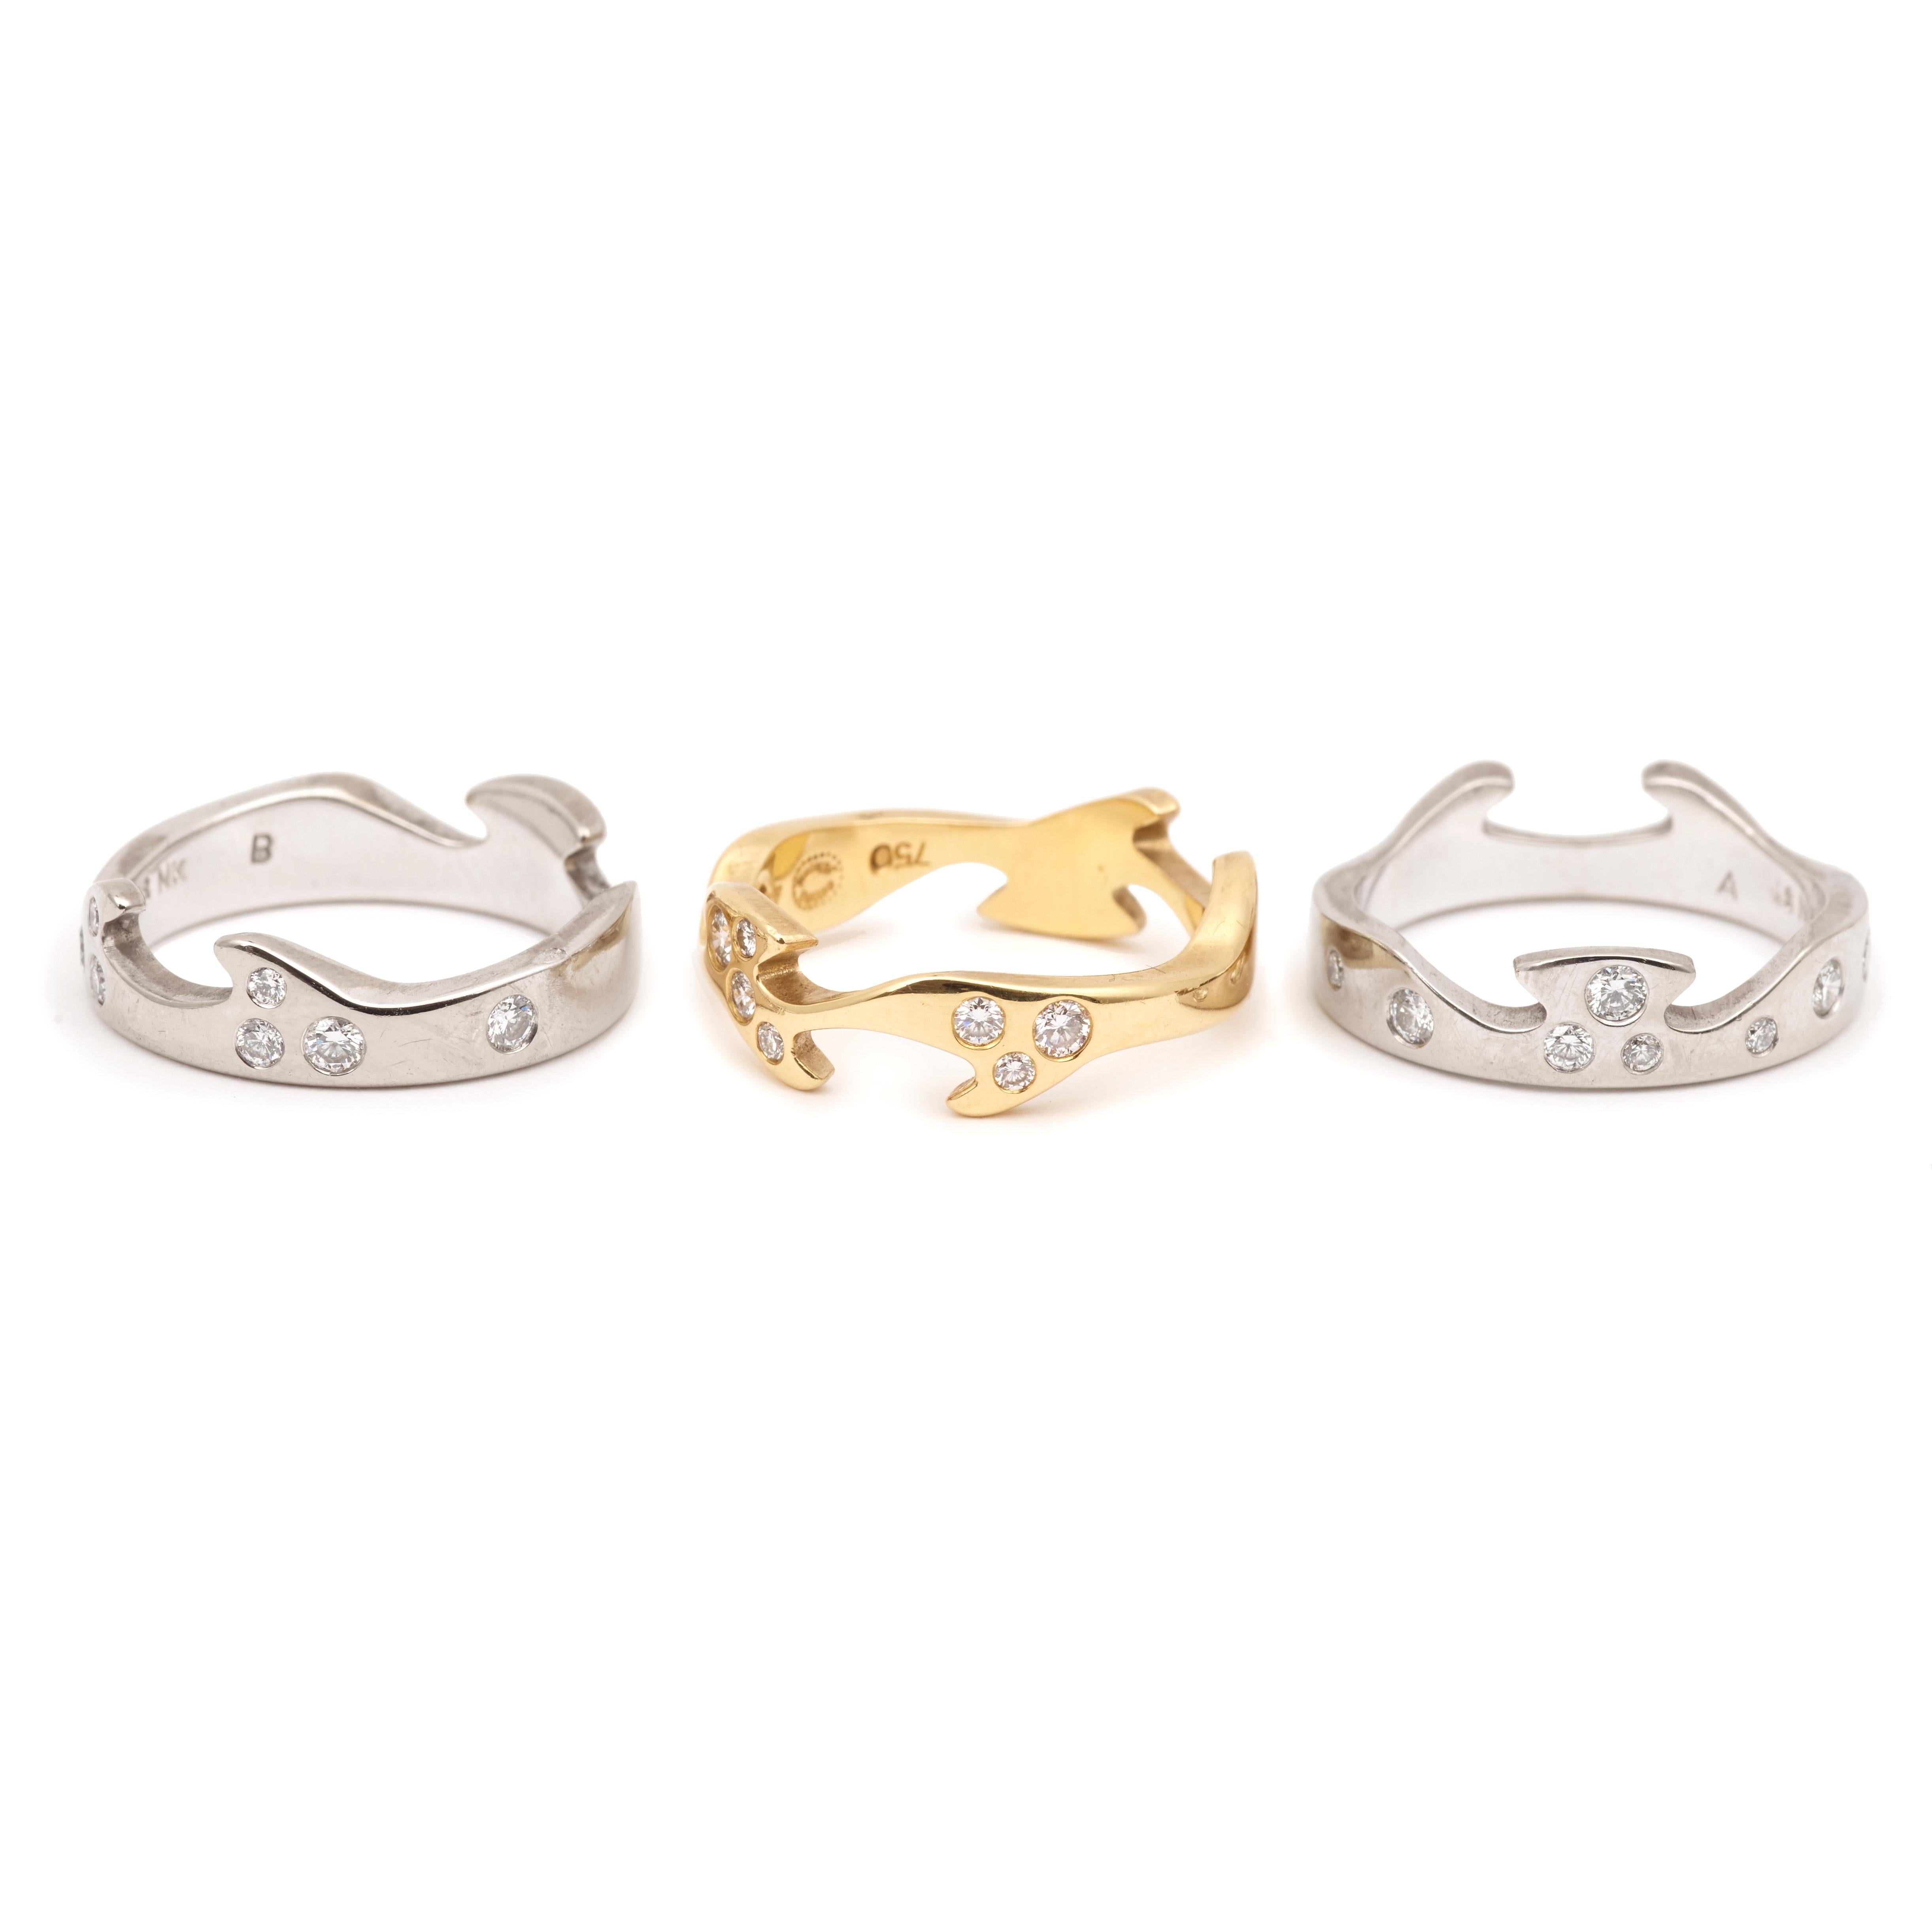 Amazing trilogy of rings called “Fusion” with diamonds signed Georg Jensen.

Two rings in white gold and one in yellow gold, they fit into each other offering a great possibility of combination.
The three rings are paved with diamonds.

Sold in